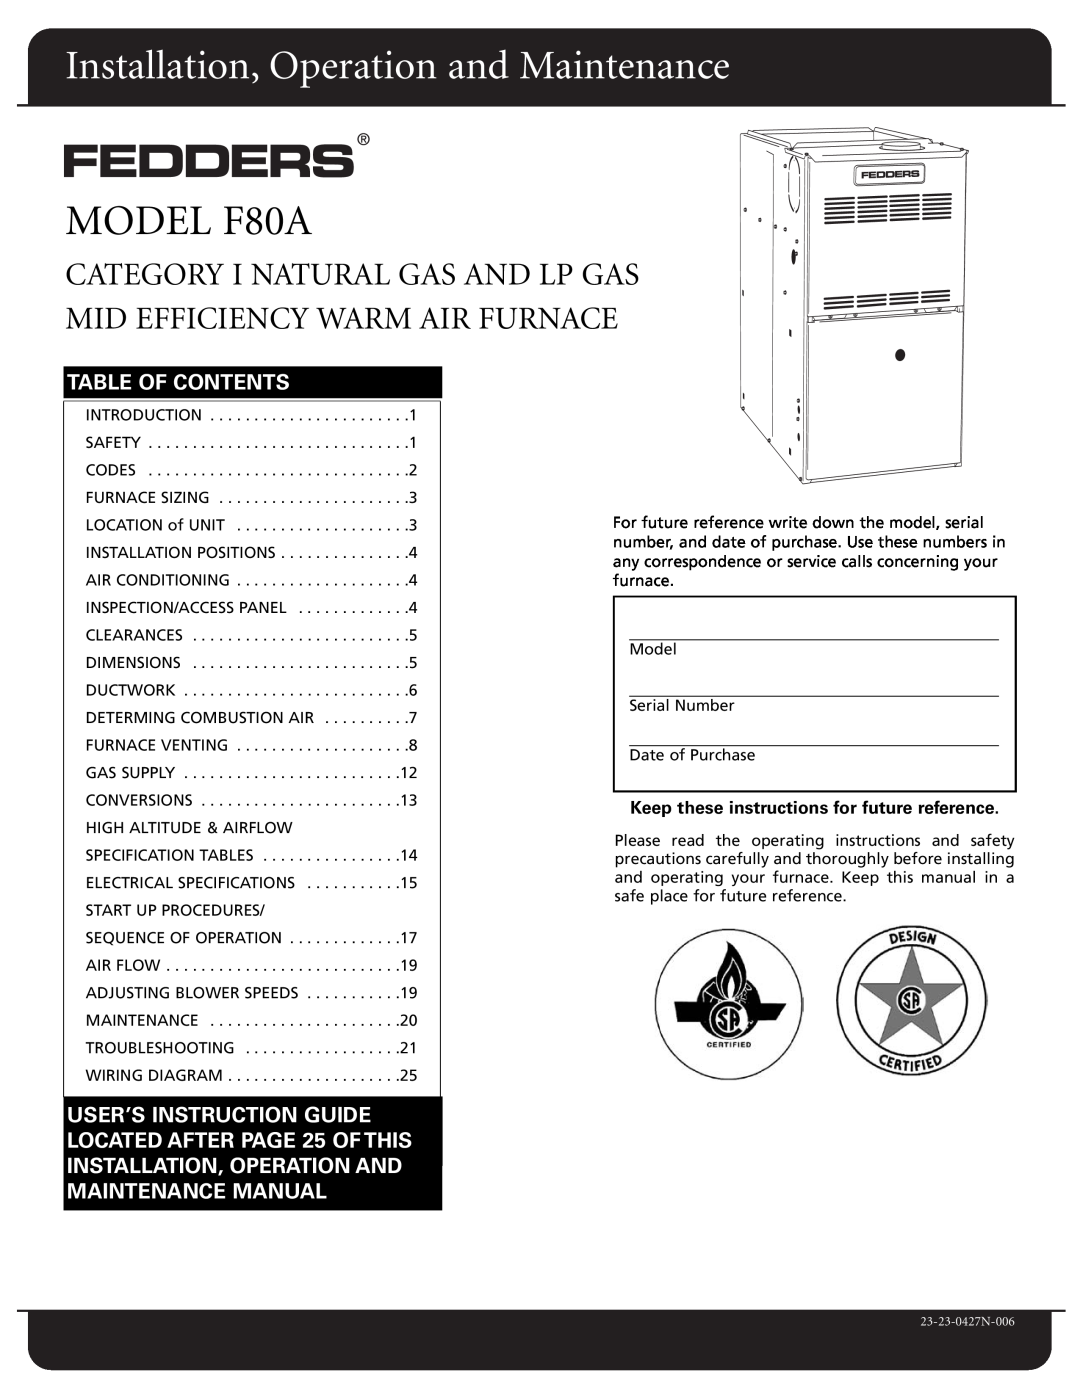 Fedders dimensions Keep these instructions for future reference, MODEL F80A, Installation, Operation and Maintenance 